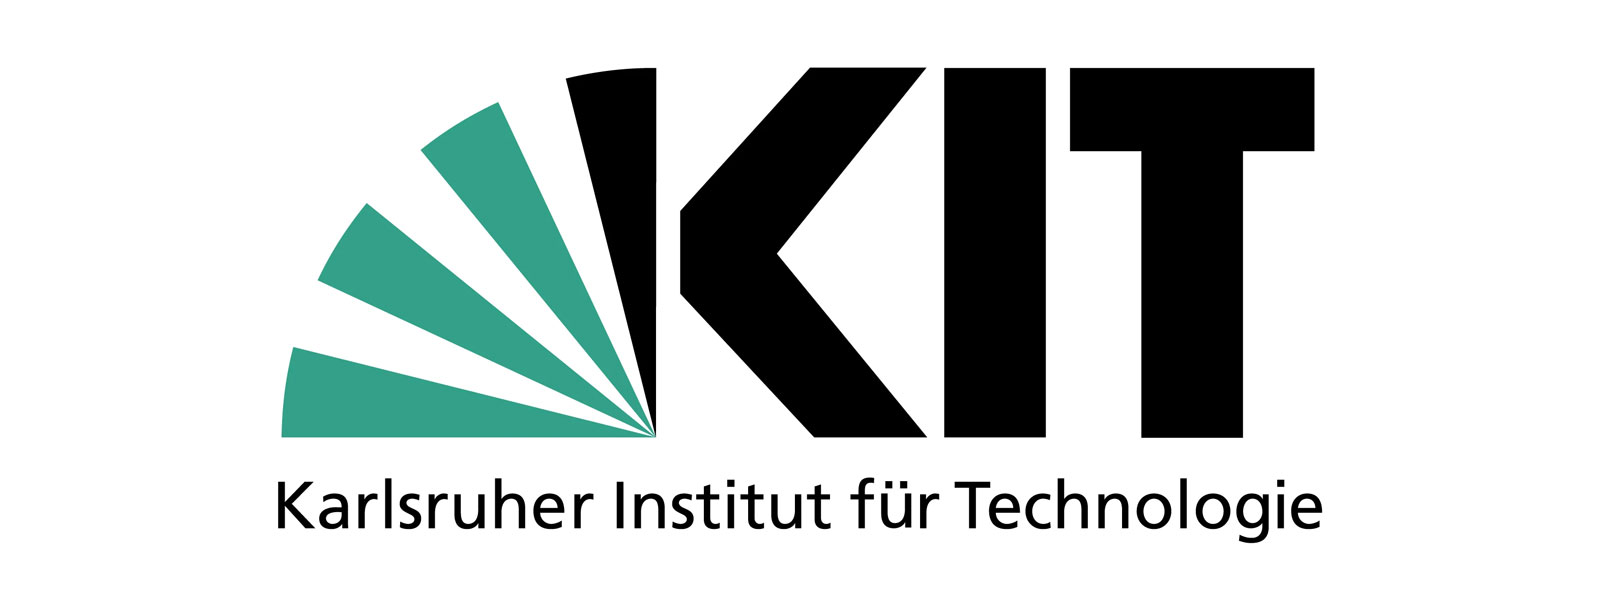 Skeleton Technologies and Karlsruhe Institute of Technology